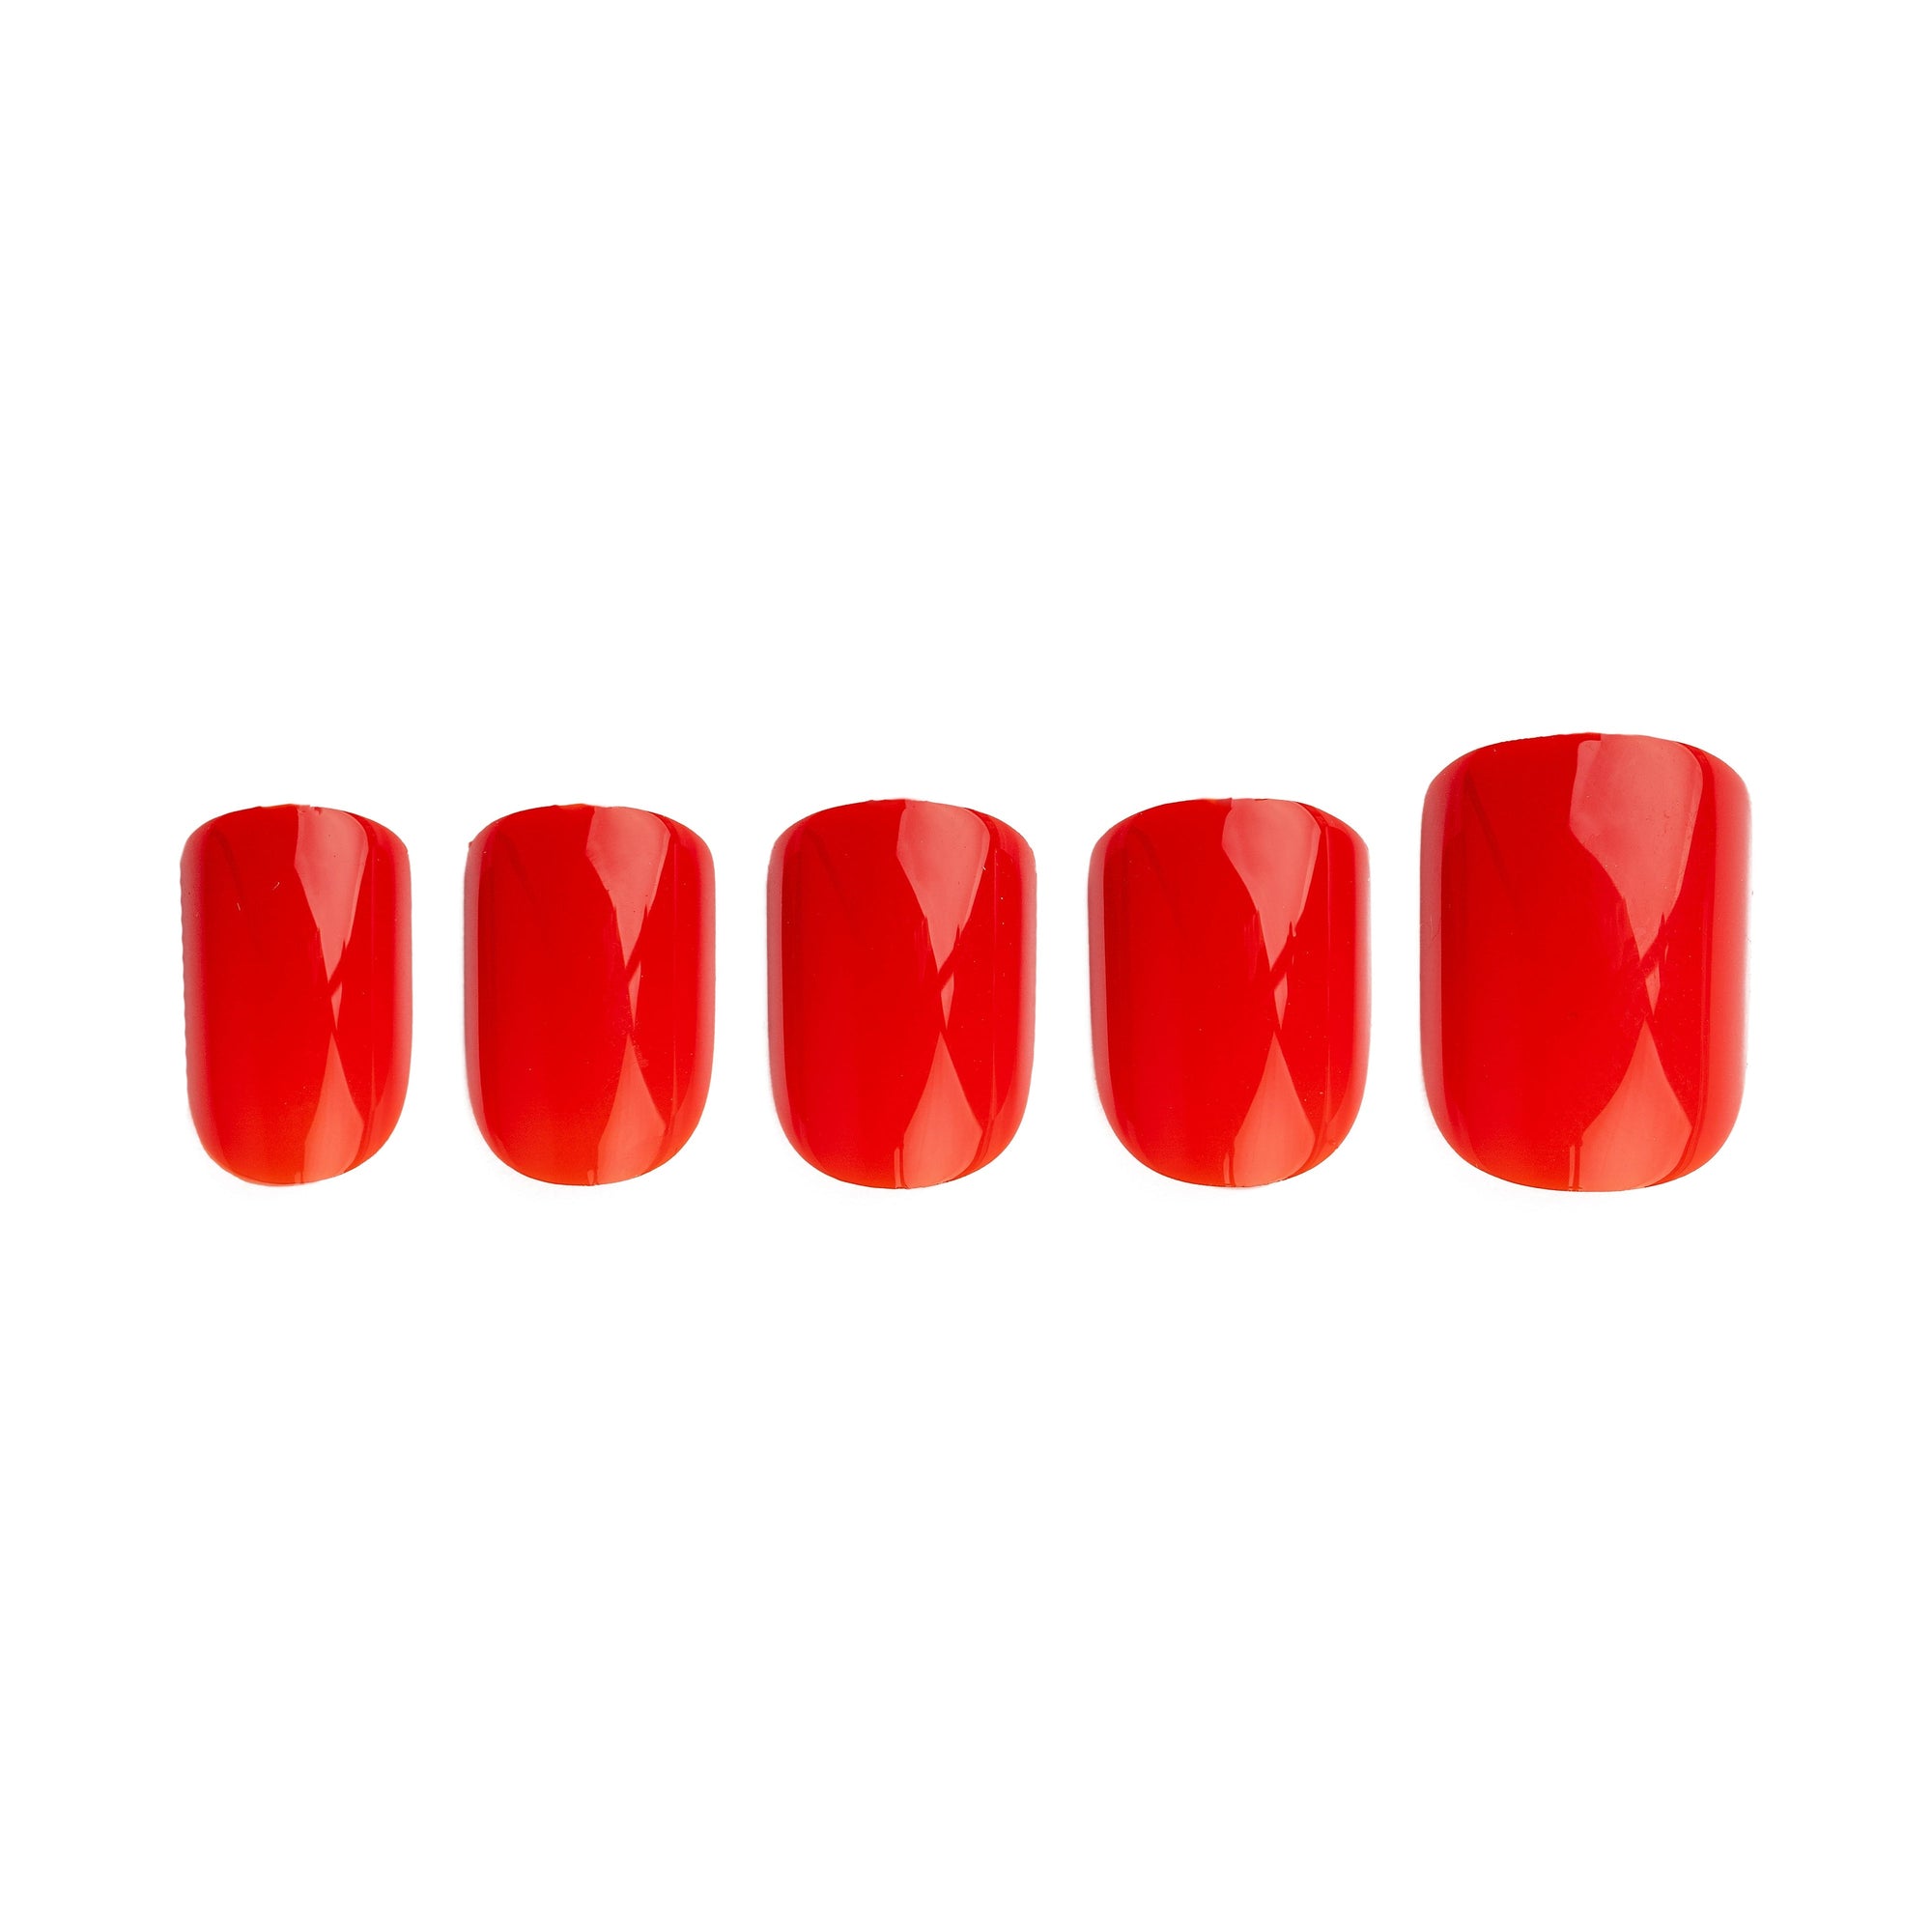 Invogue Bright Red Square Nails (24 Pieces)